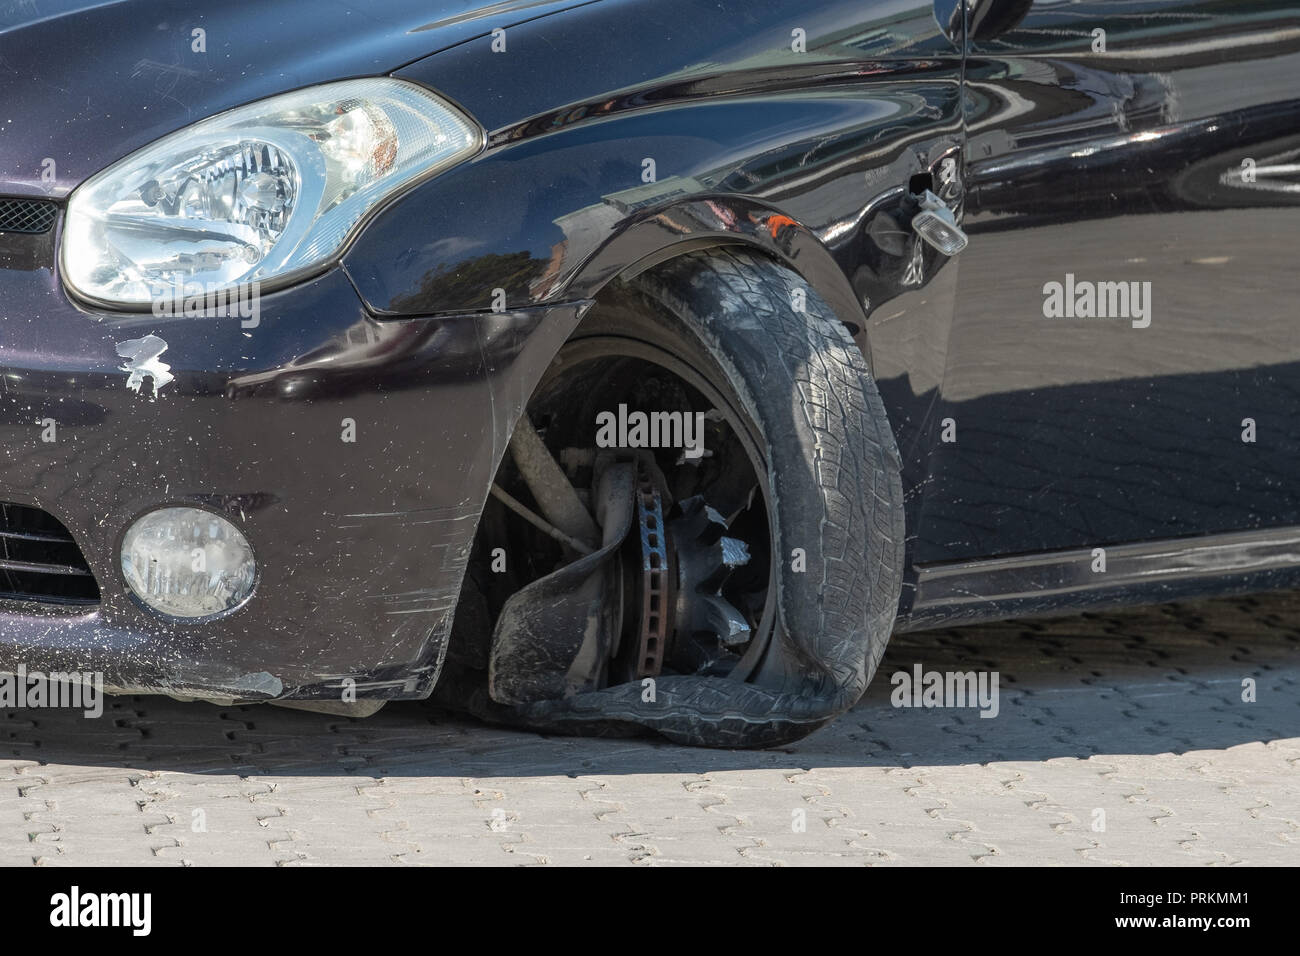 The car which had an accident with the broken forward wheel. Stock Photo